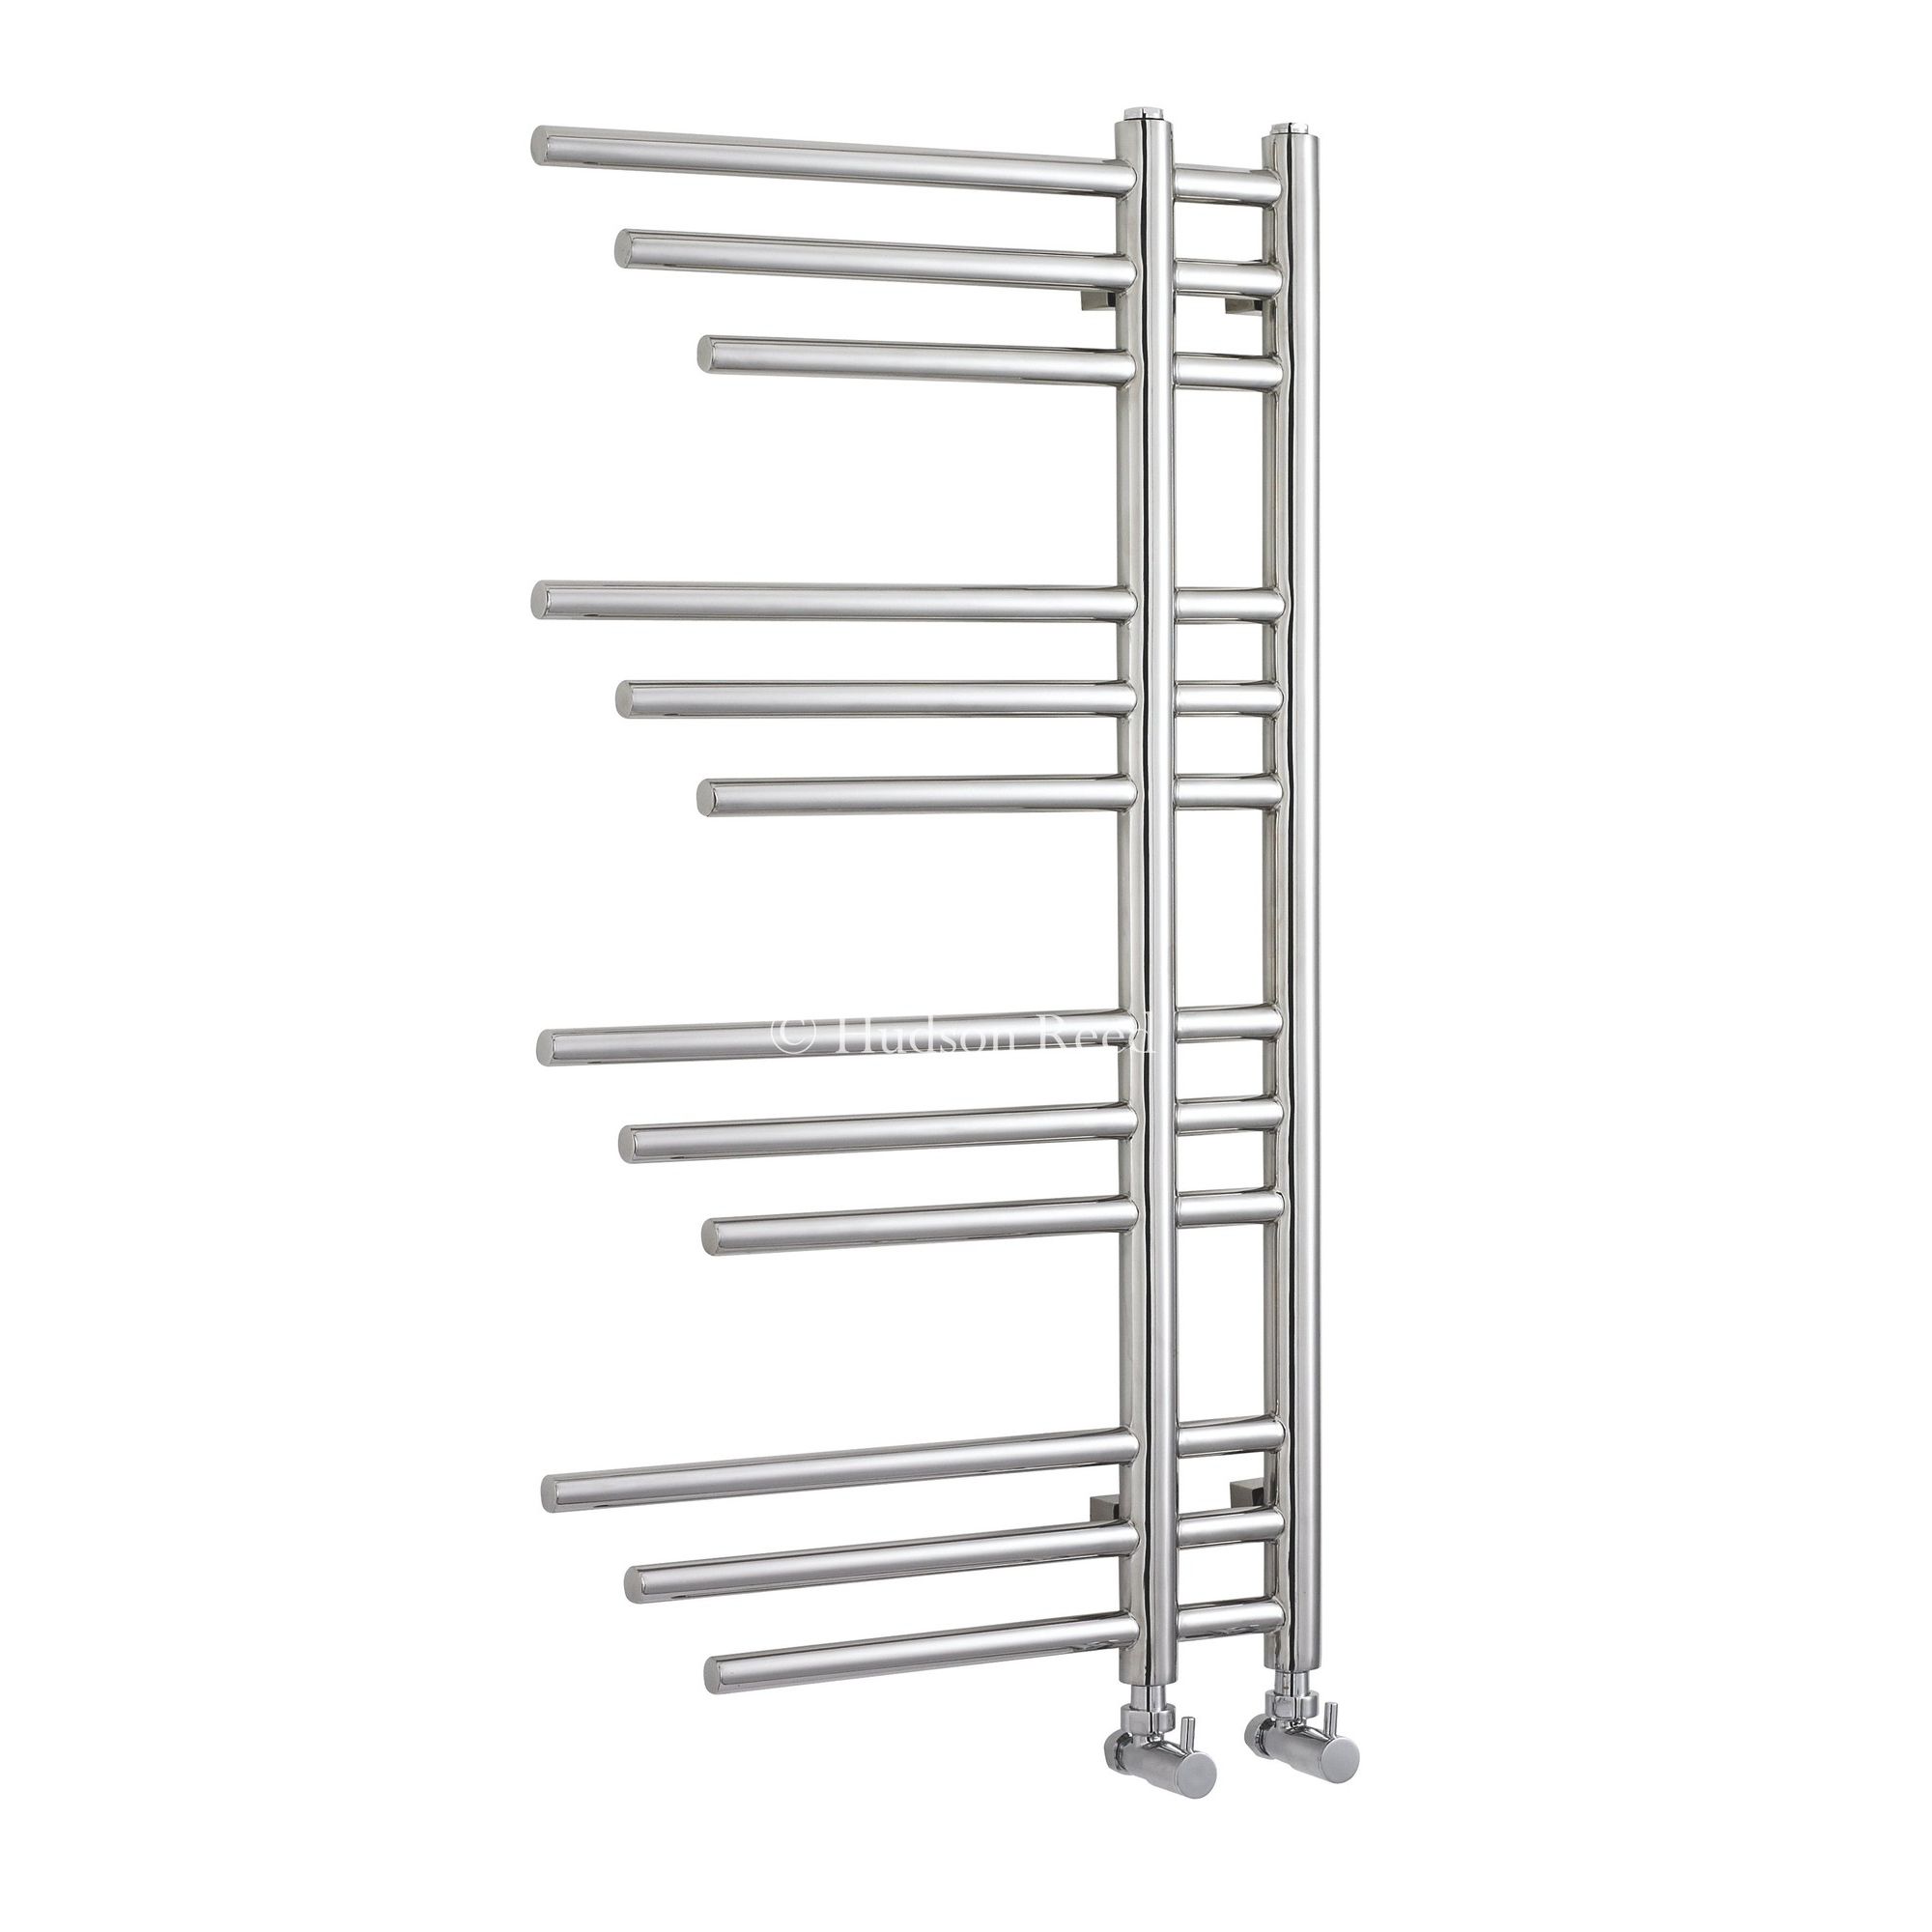 Hudson Reed Finesse Radiator in Stainless - 120 cm x 50 cm at Tescos Direct